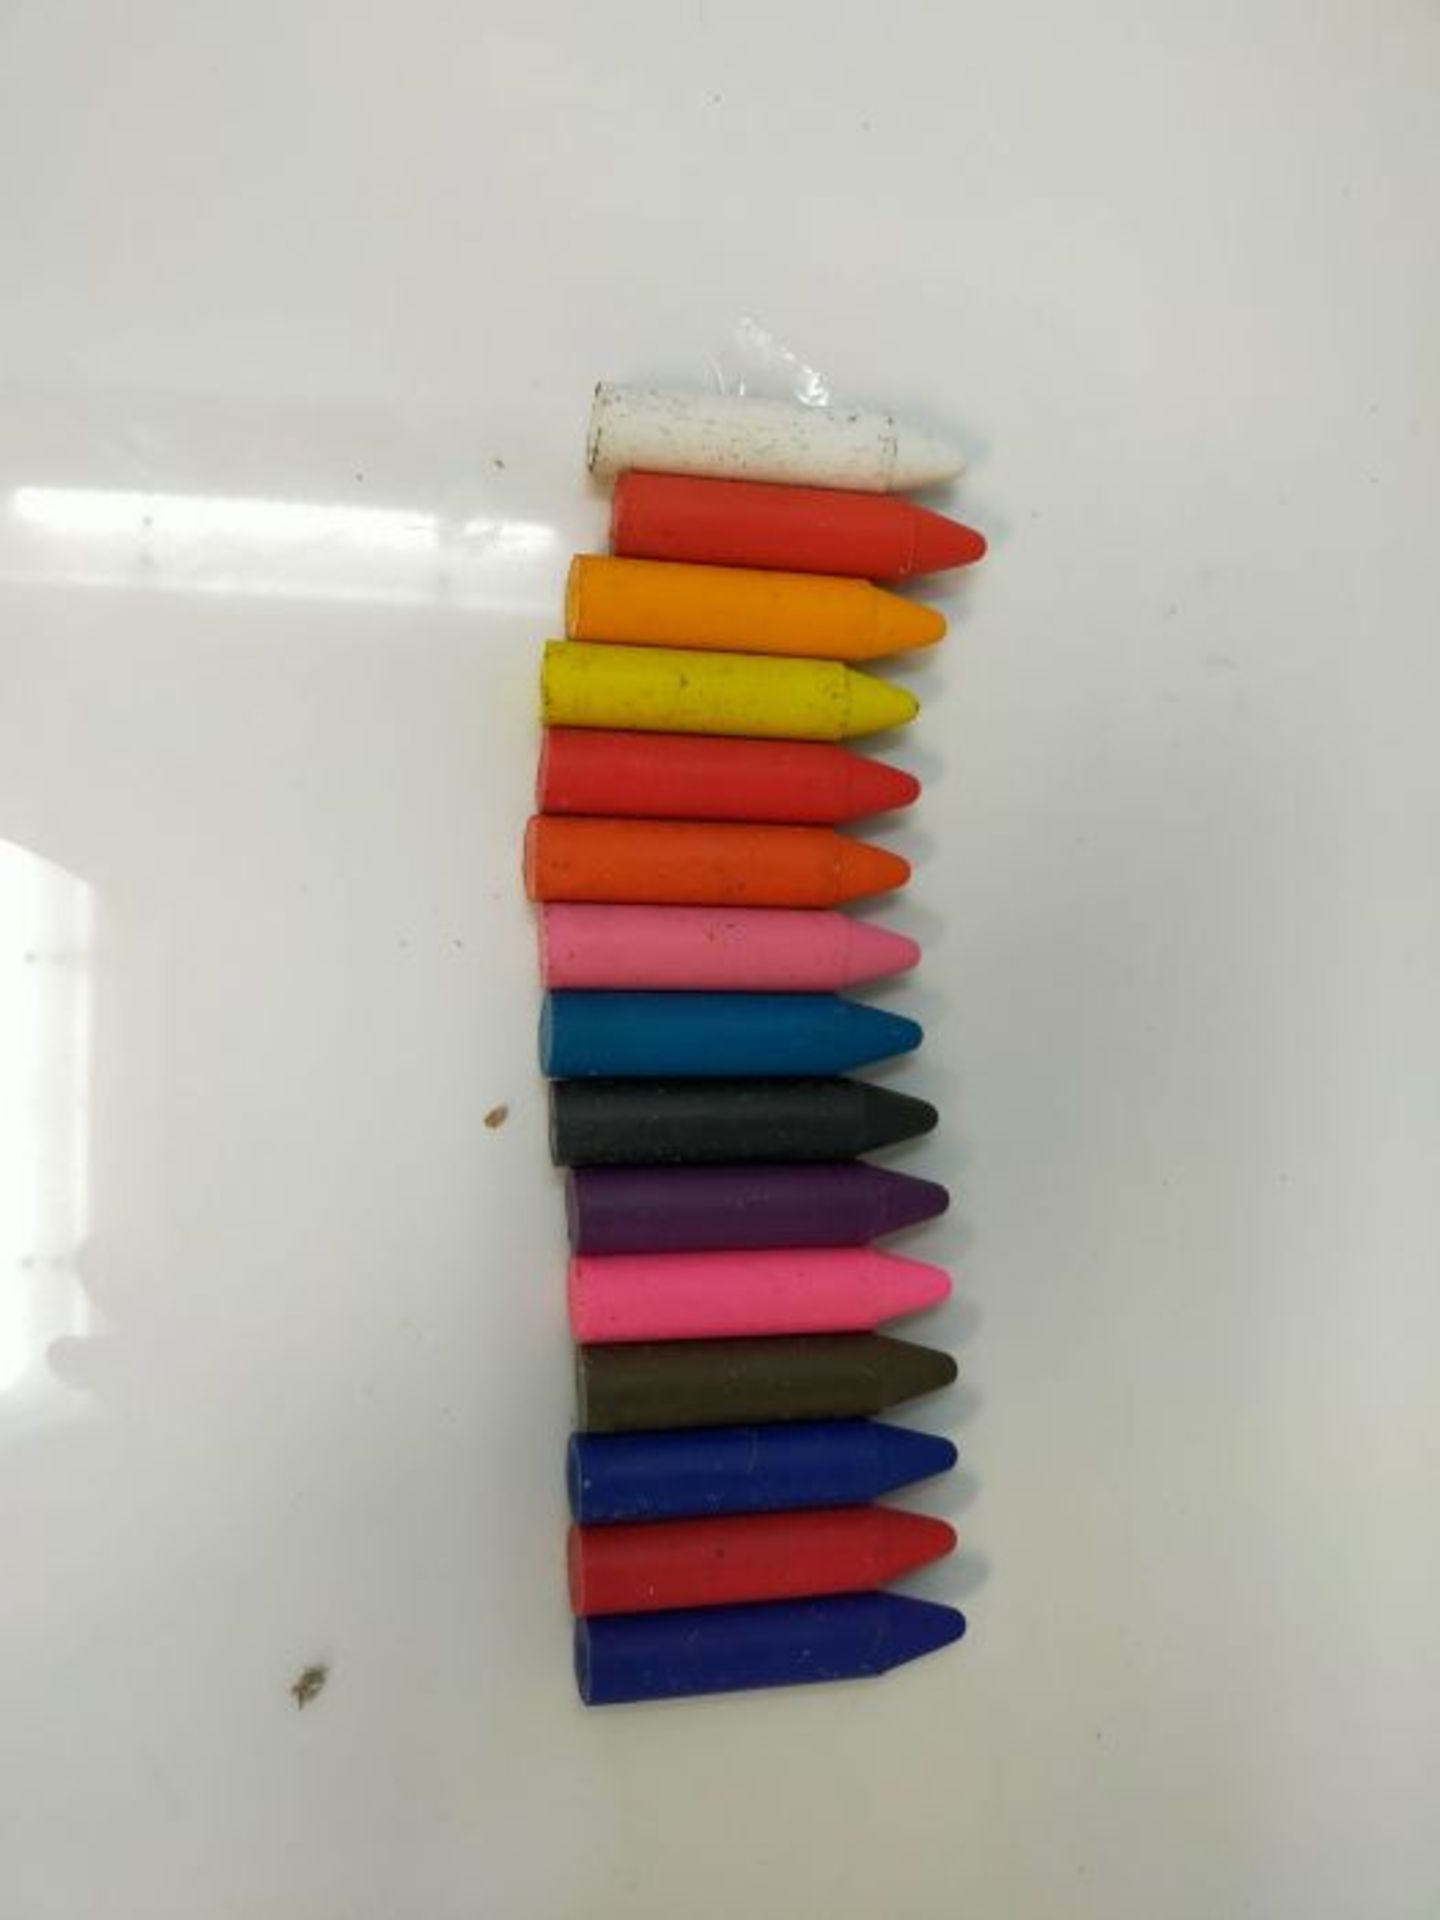 [INCOMPLETE] Galt Toys, Chunky Crayons - 20 Pieces, Easy to Hold Crayons for Kids, Age - Image 3 of 3